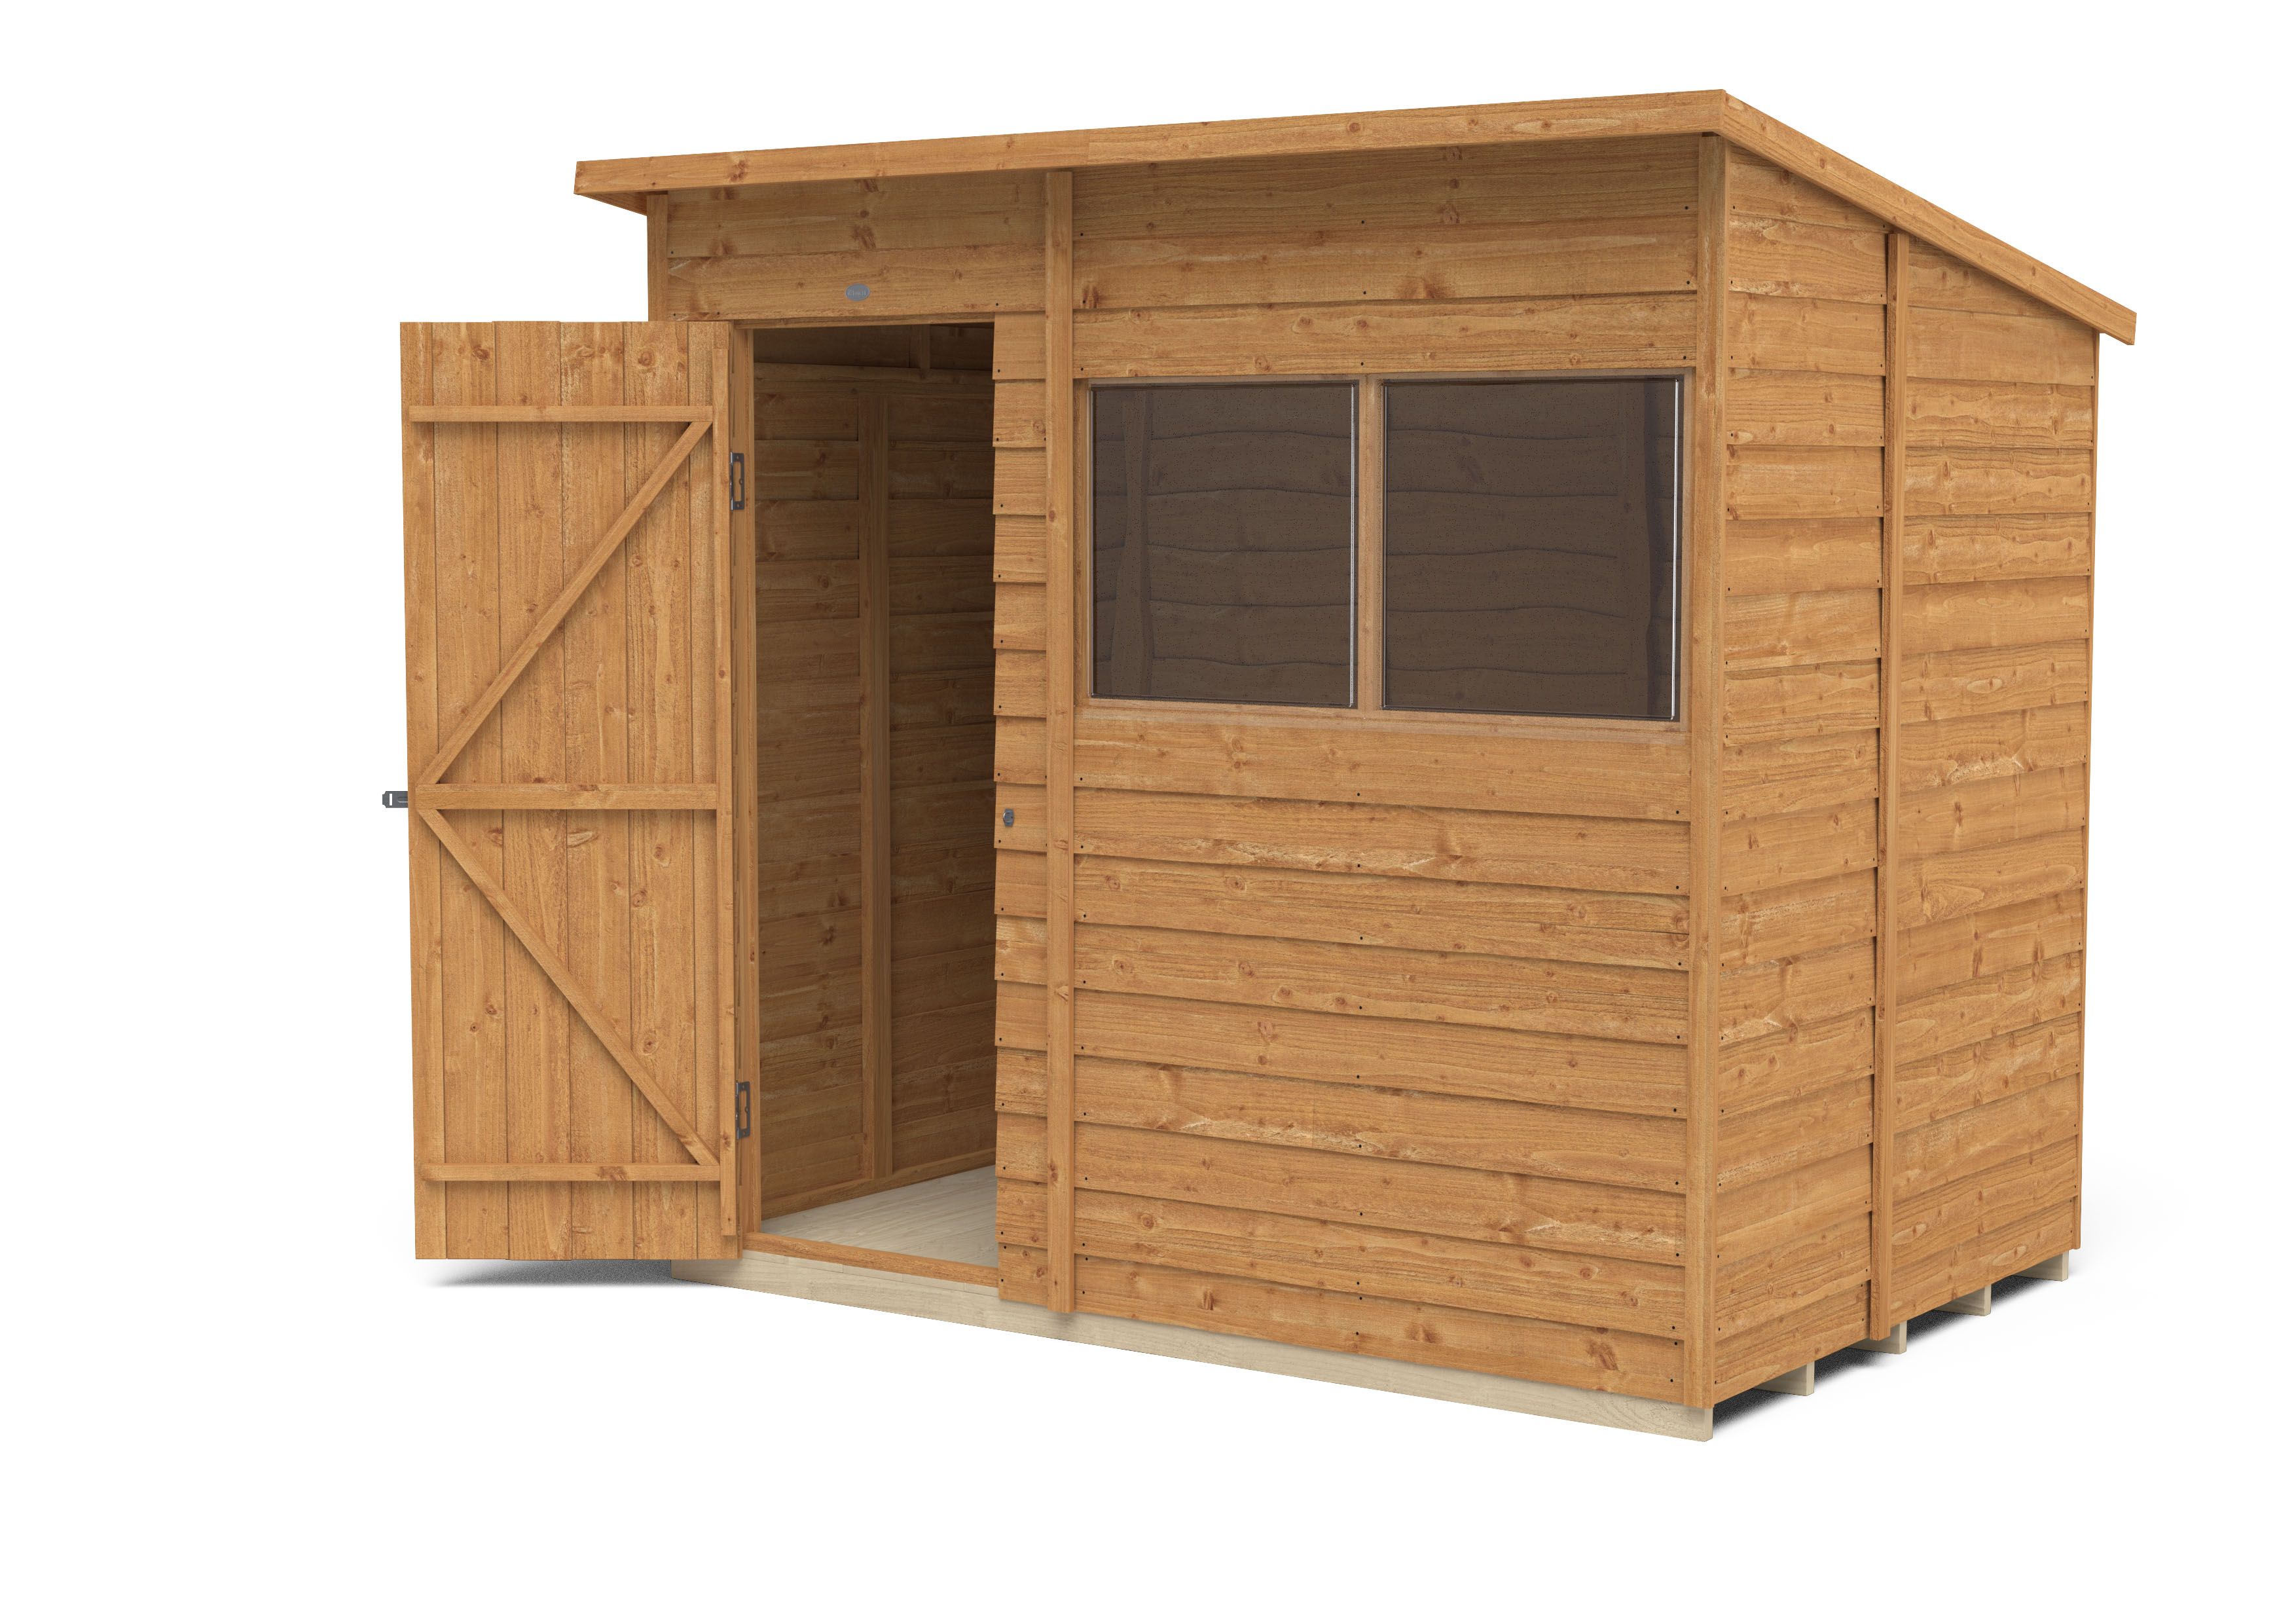 Forest Garden 7x5 ft Pent Wooden Shed with floor & 2 windows (Base included)